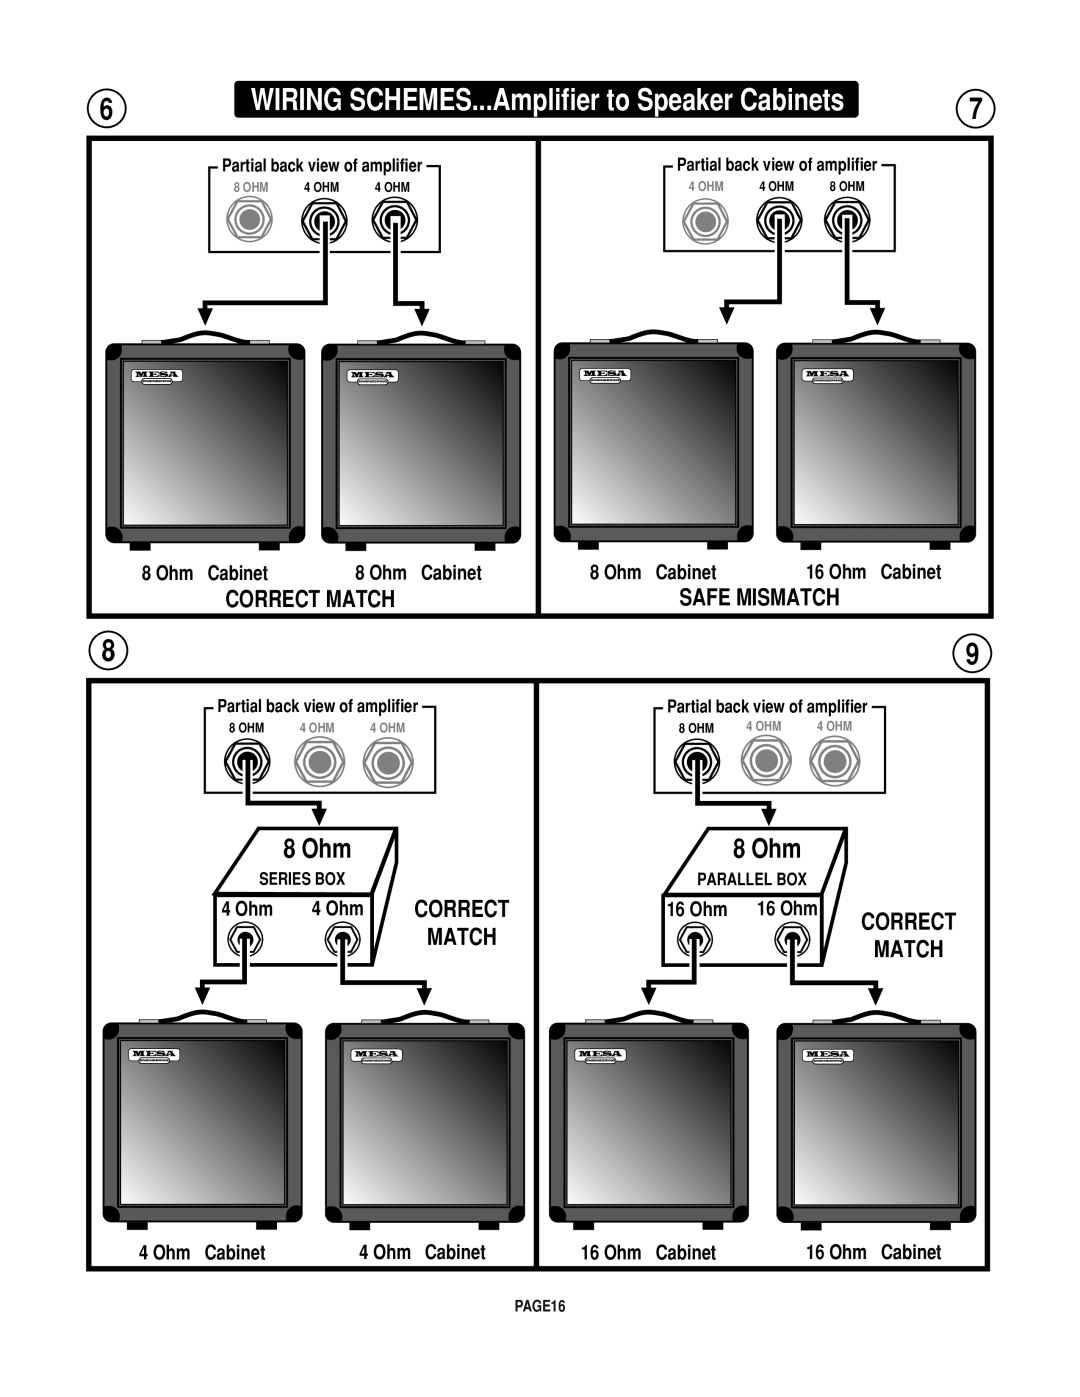 Mesa/Boogie Rectifier Stereo WIRING SCHEMES...Amplifier to Speaker Cabinets, 8 Ohm, Correct Match, Safe Mismatch, 16 Ohm 